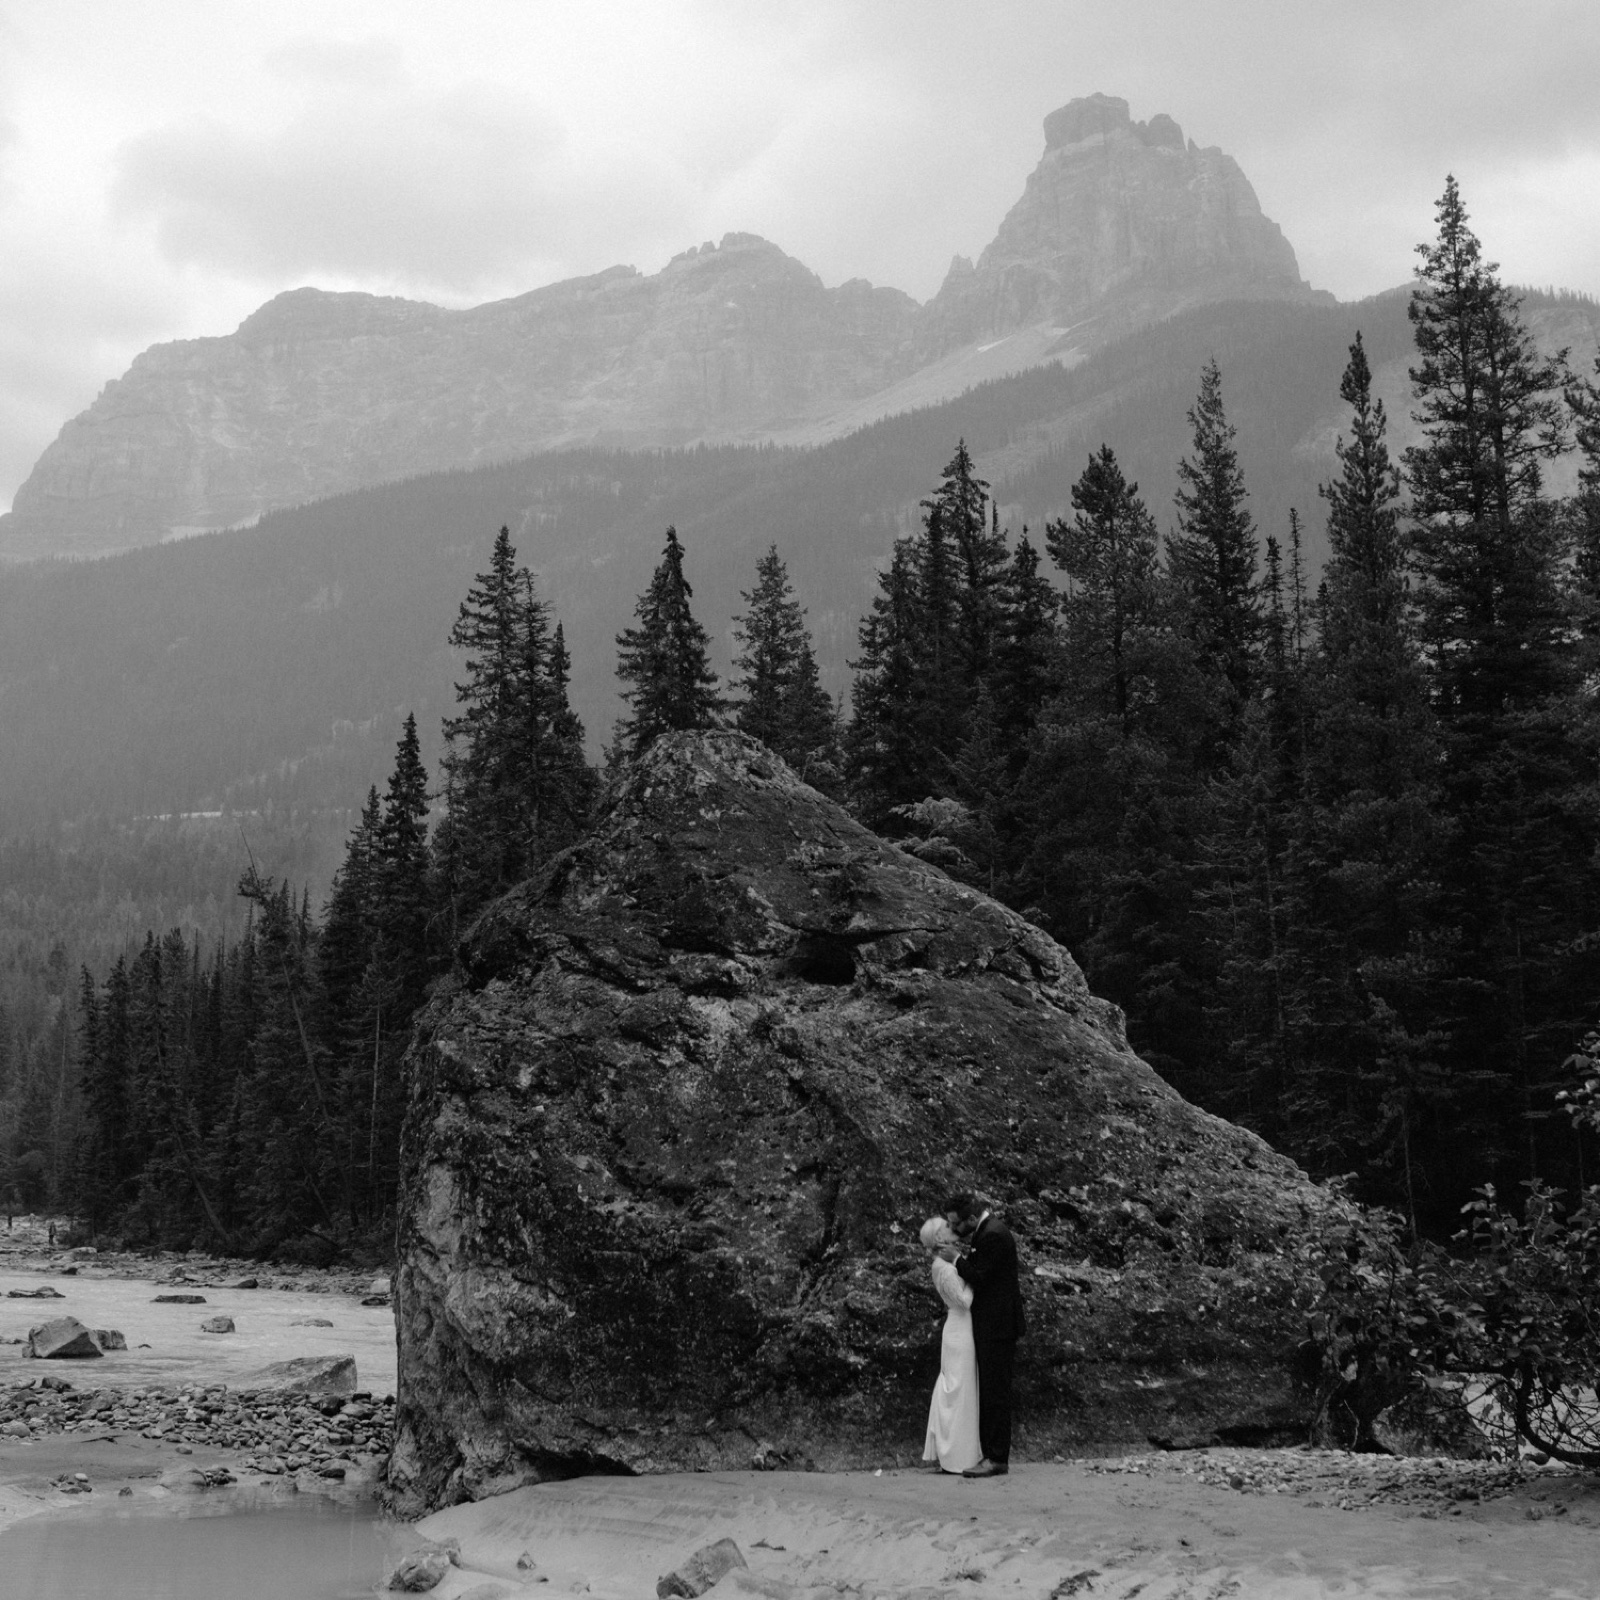 Unique ceremony location in Banff and Yoho parks in Canada with a large boulder altar, river and mountain backdrops